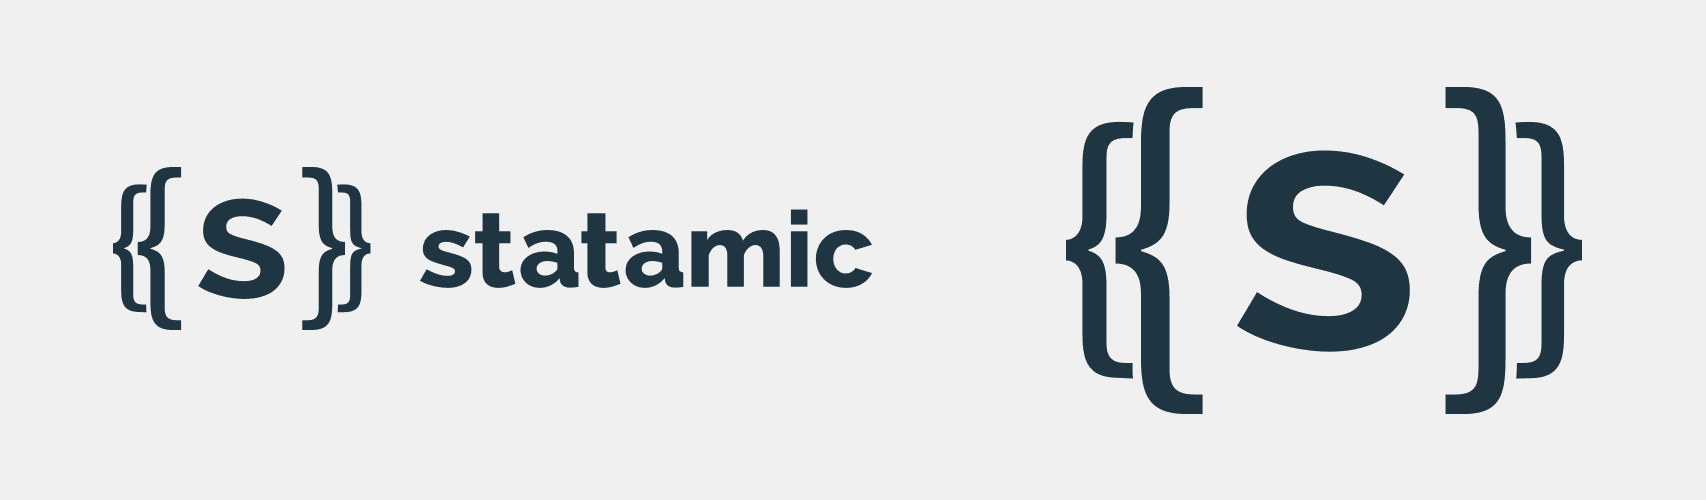 Migrating EE1 to Statamic Thumbnail